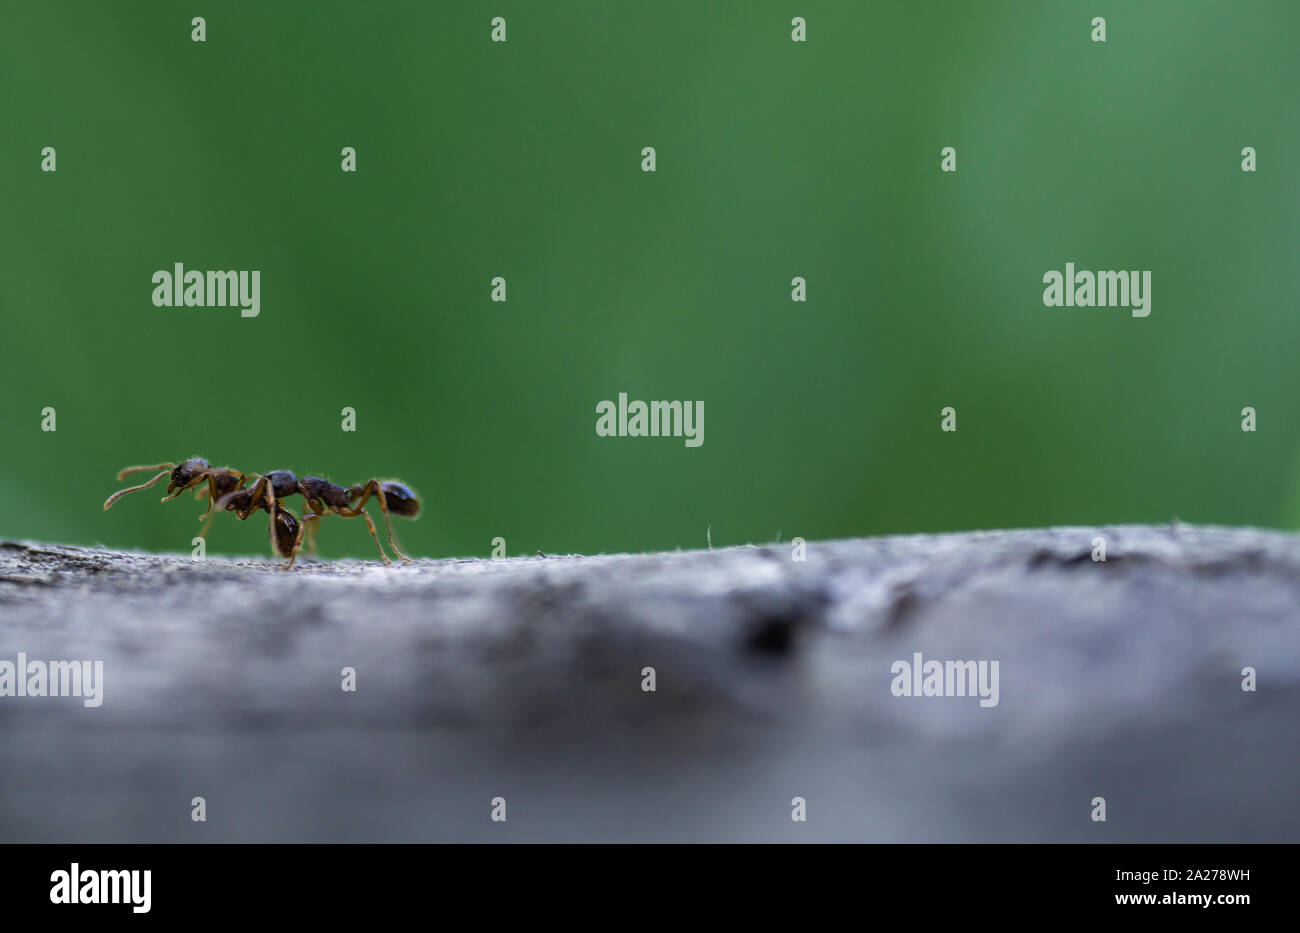 An ant carrying another ant on green background Stock Photo